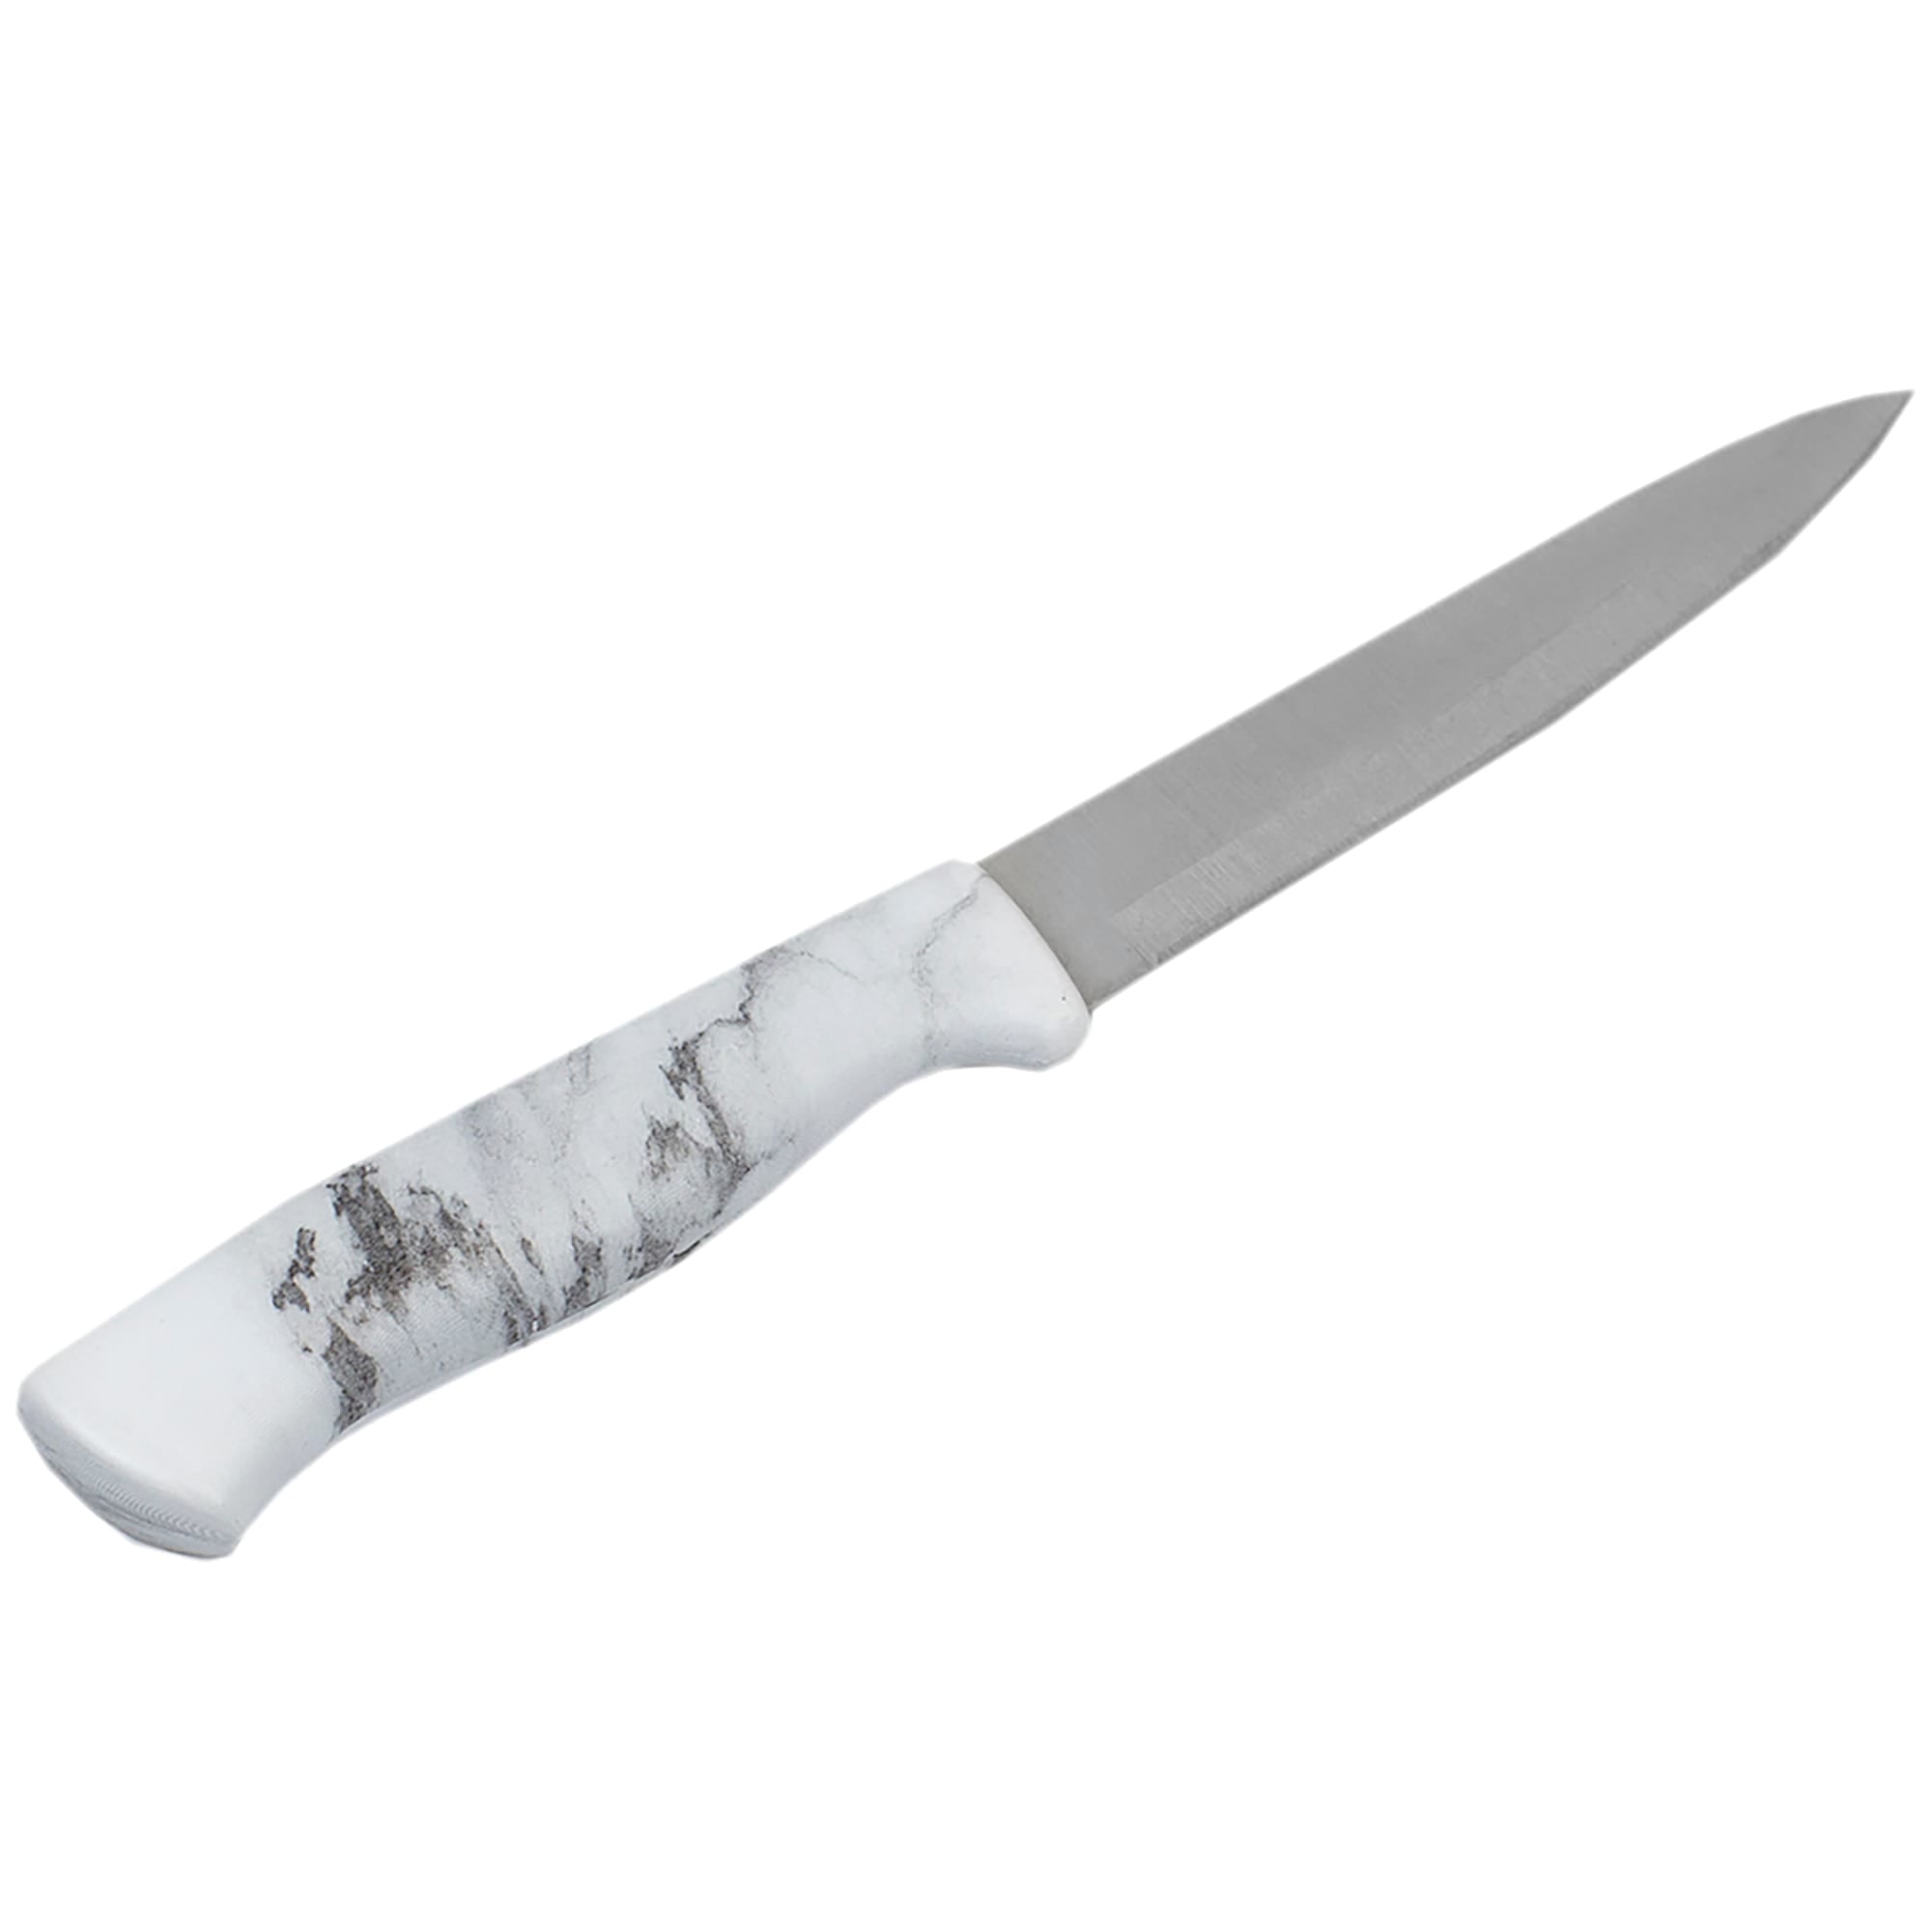 Home Basics Marble Collection 5"  Utility Knife, White $1.50 EACH, CASE PACK OF 24